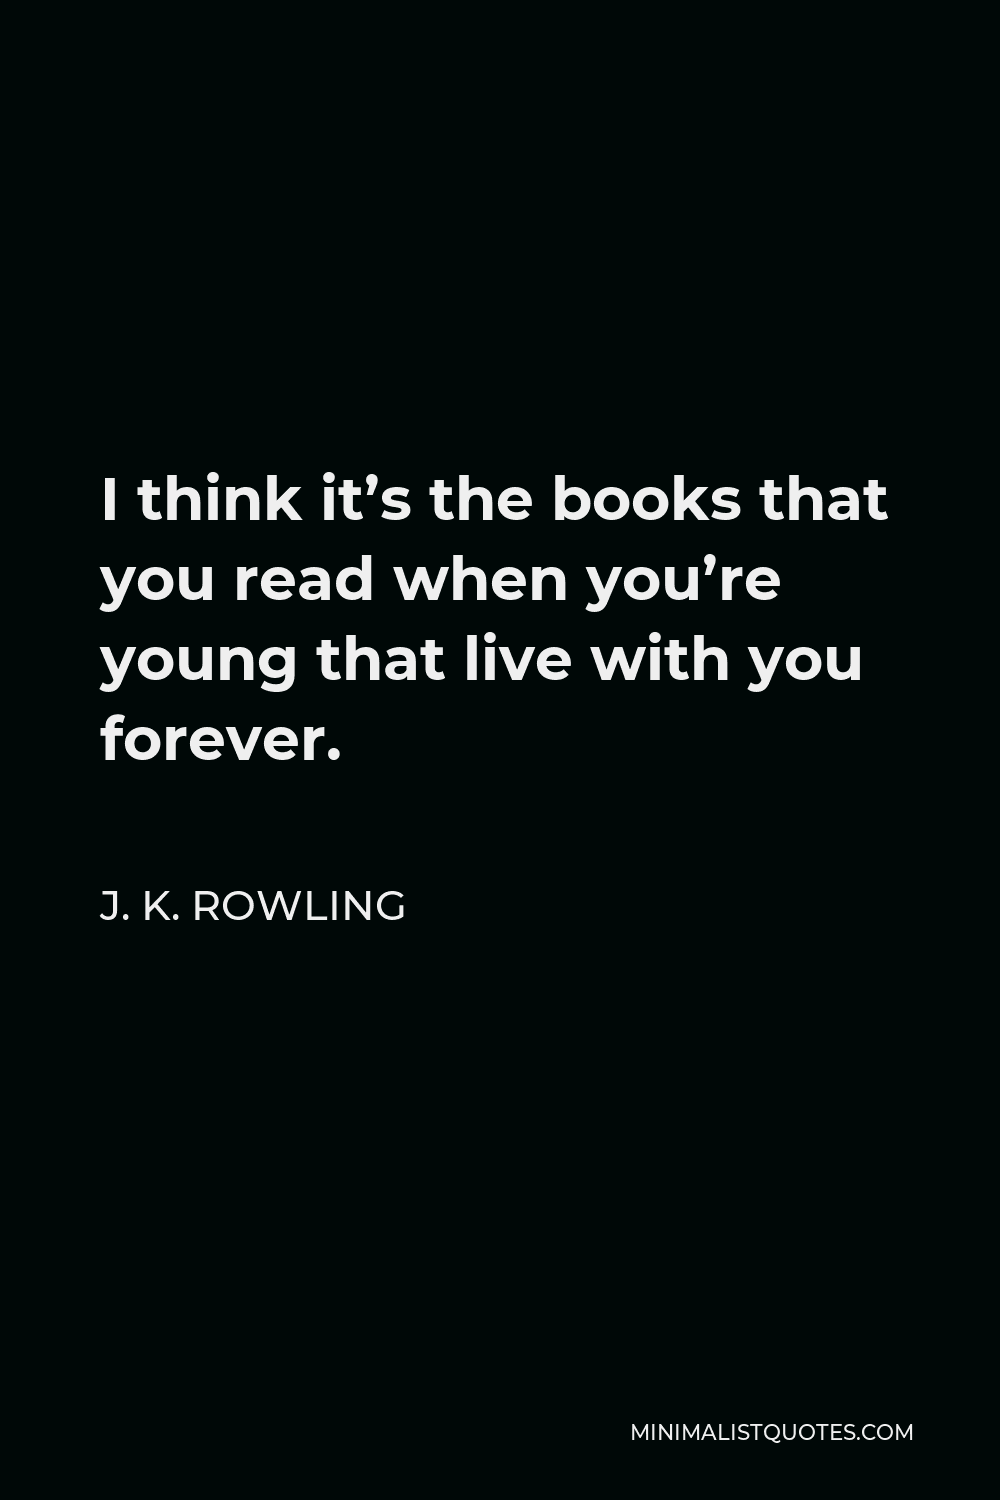 J. K. Rowling Quote - I think it’s the books that you read when you’re young that live with you forever.